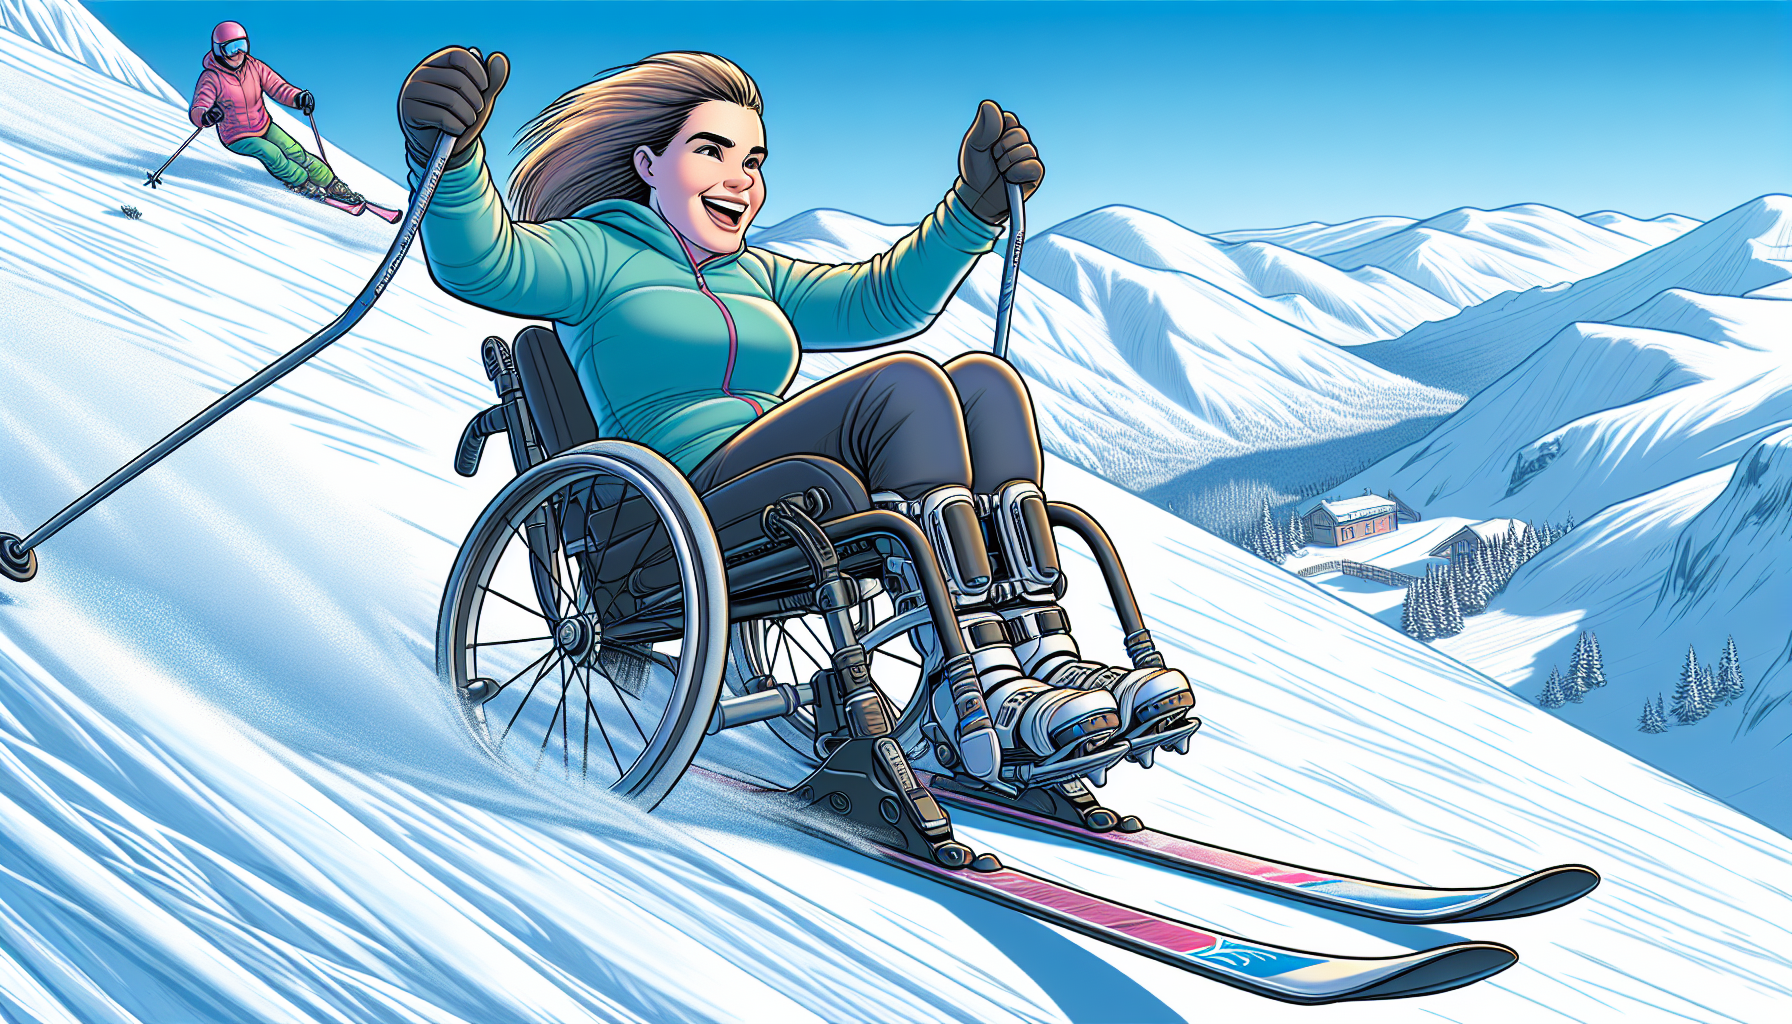 Adaptive Skiing: A Sporting Breakthrough for People with Disabilities